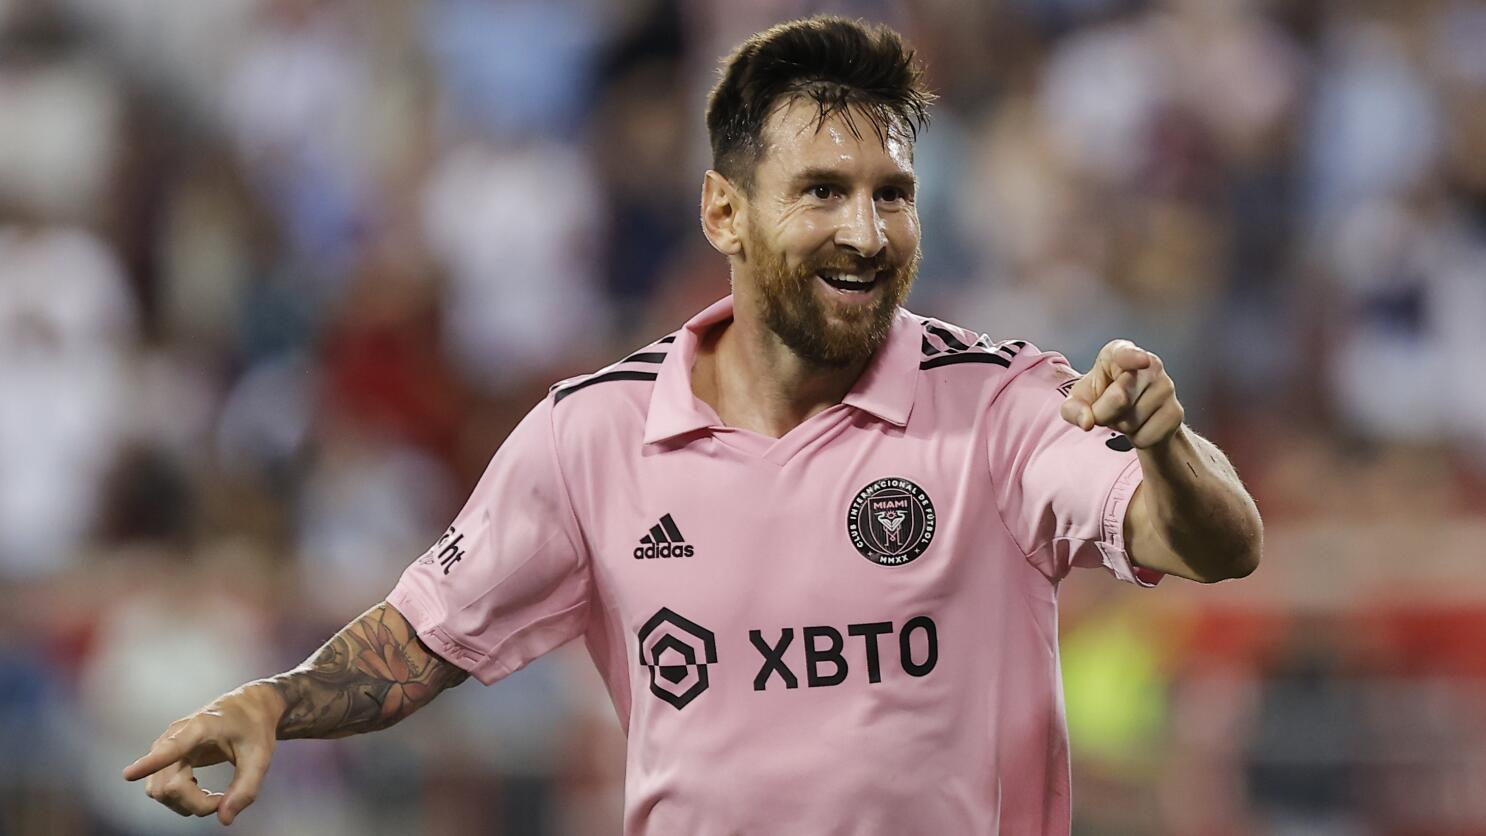 From Lionel Messi joining Inter Miami to Chelsea's record-breaking